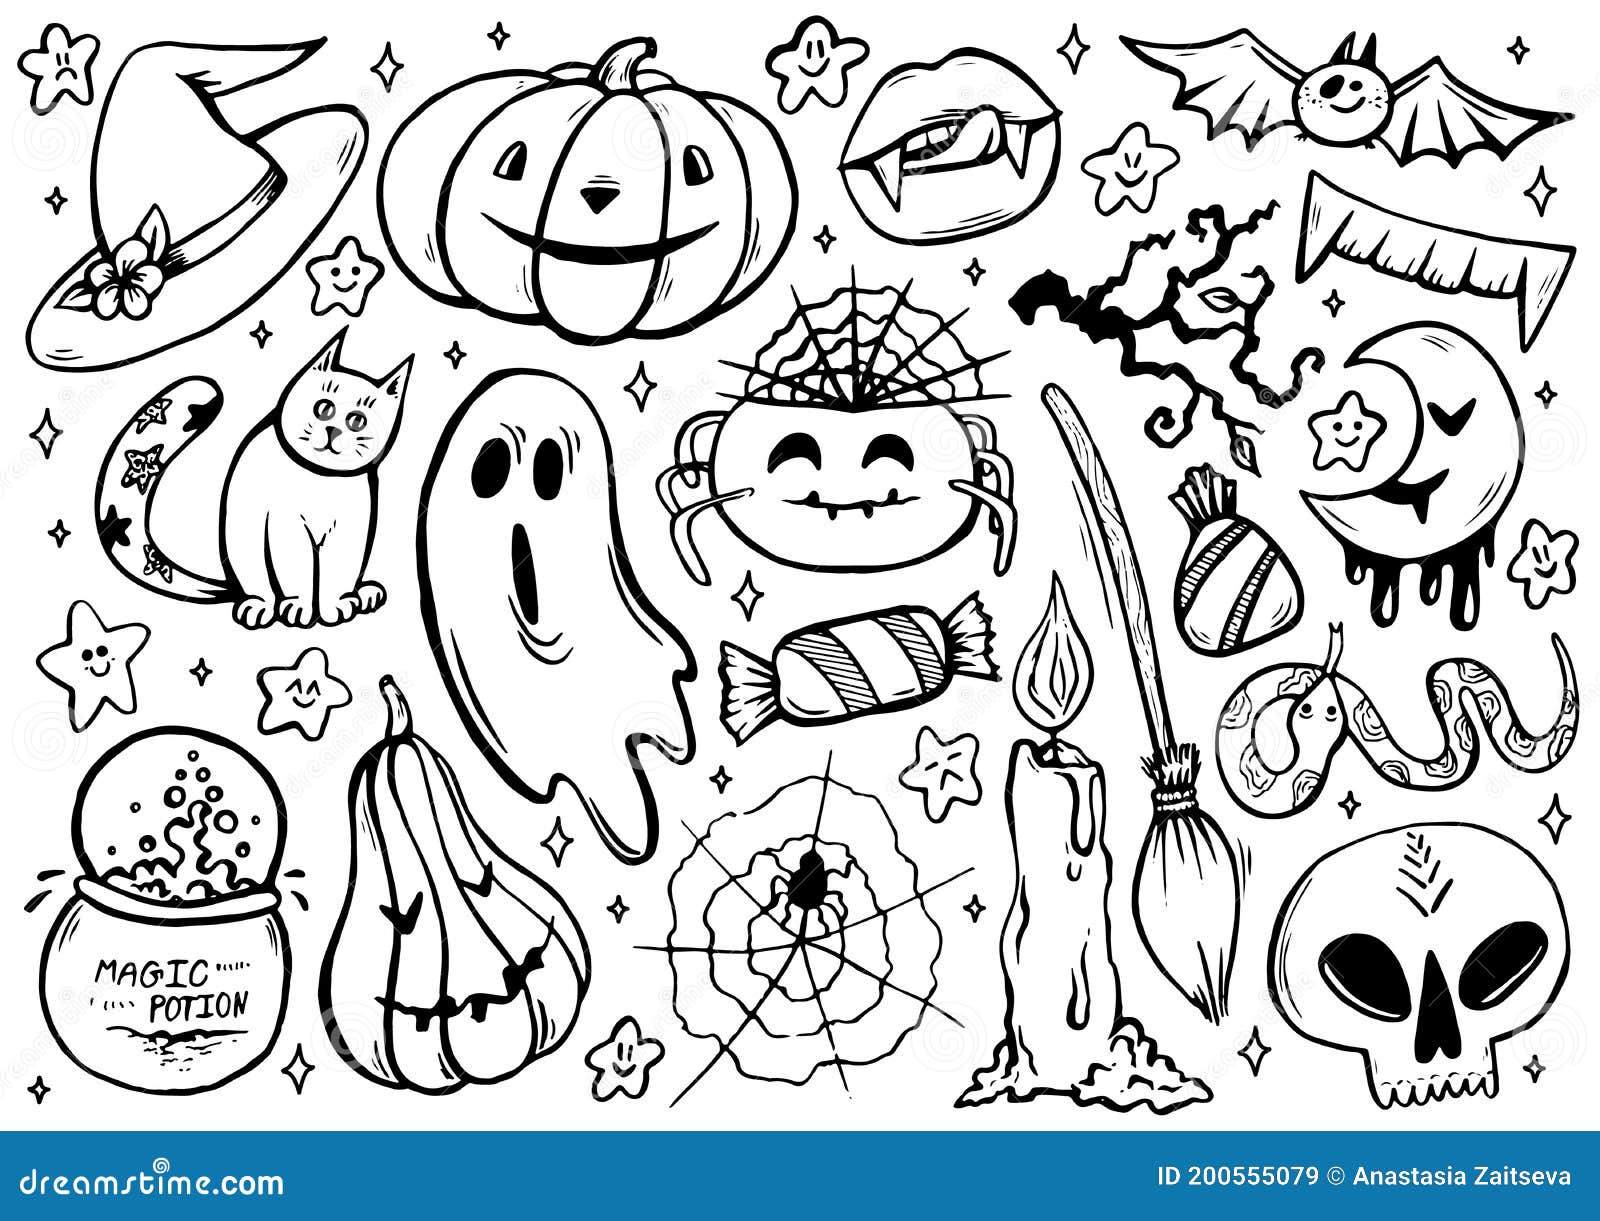 Halloween Coloring Page With Spooky Objects, Hand Drawn Cute Halloween ...